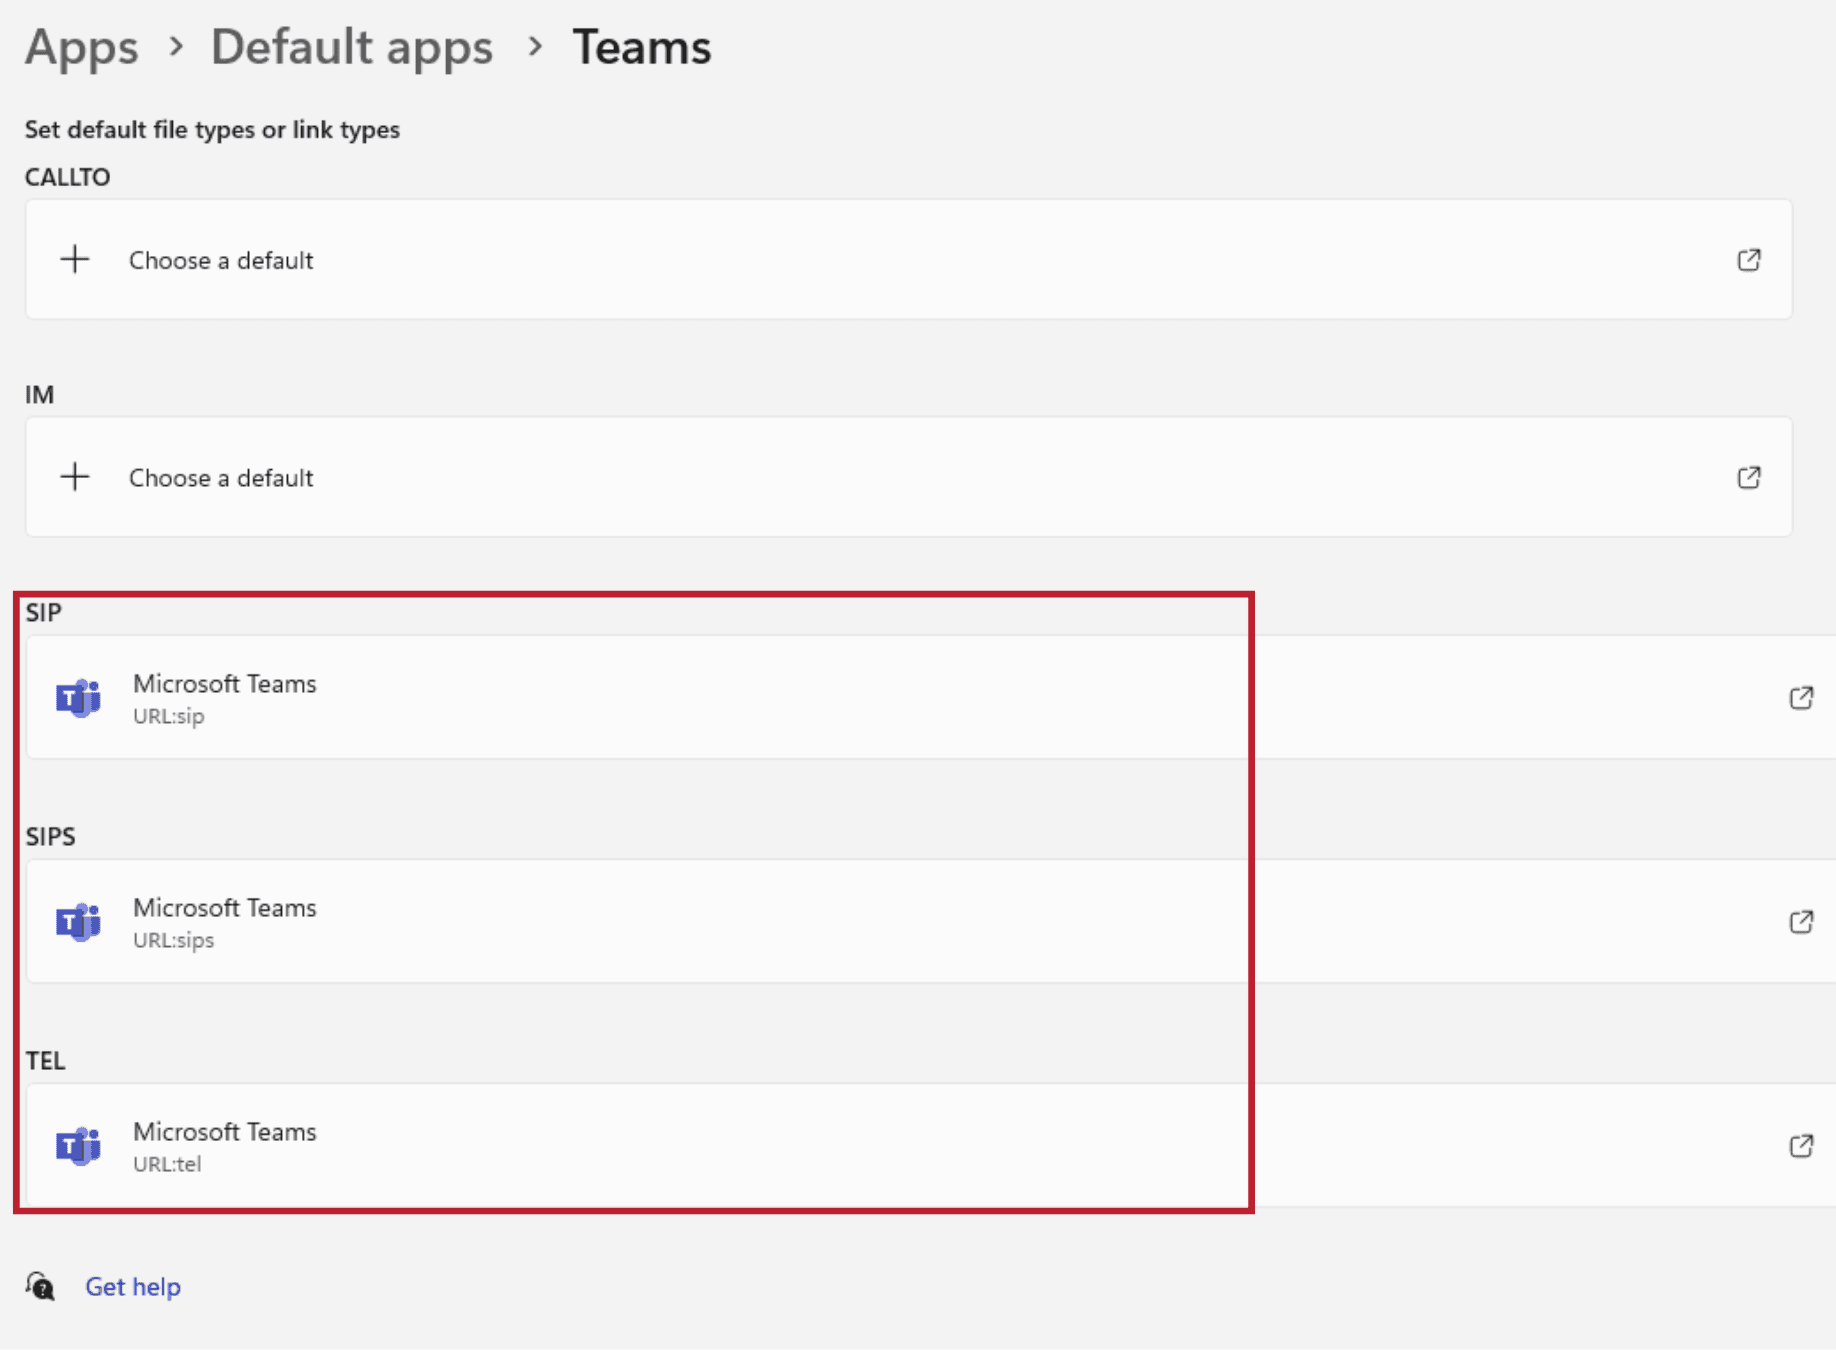 Enable click to call through Microsoft Teams - select Microsoft Teams for channels